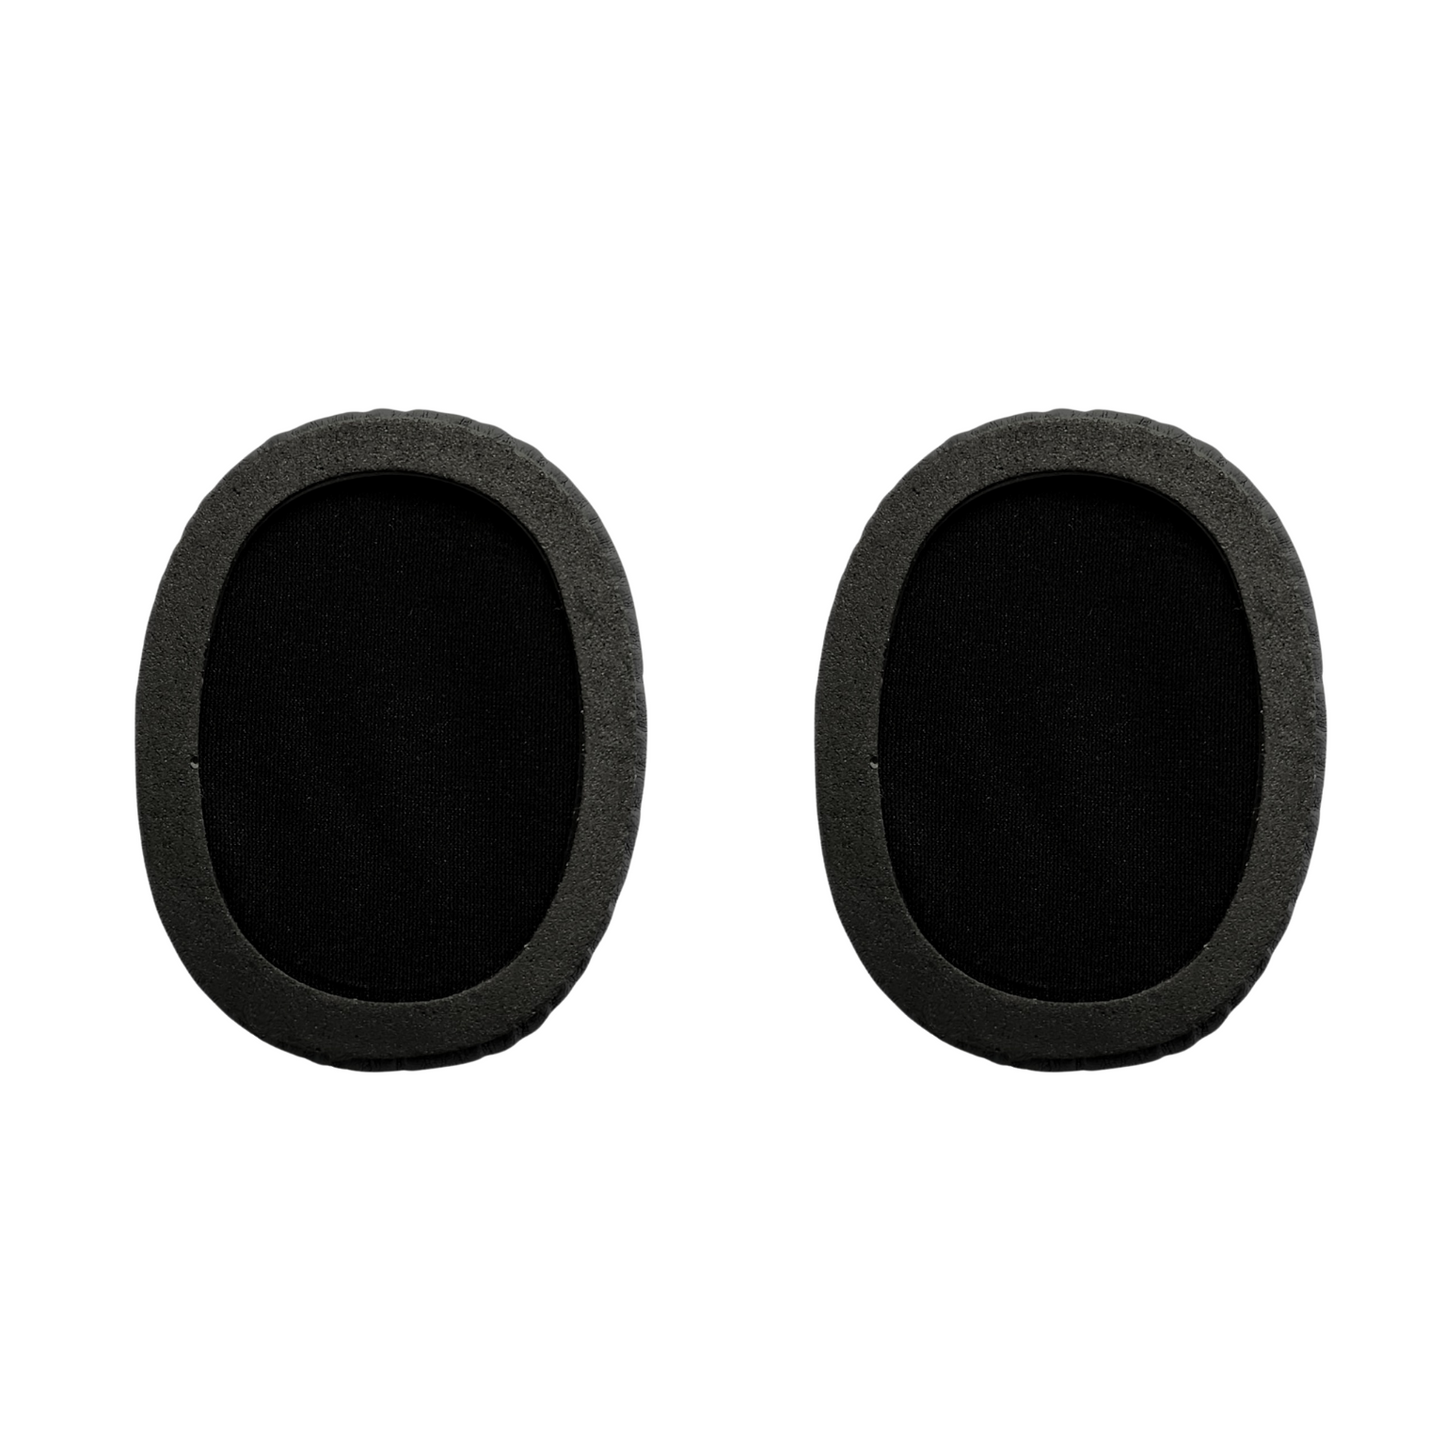 Cushion Ear Pads Replacement Set for Shenoy Audio SH010 headphones